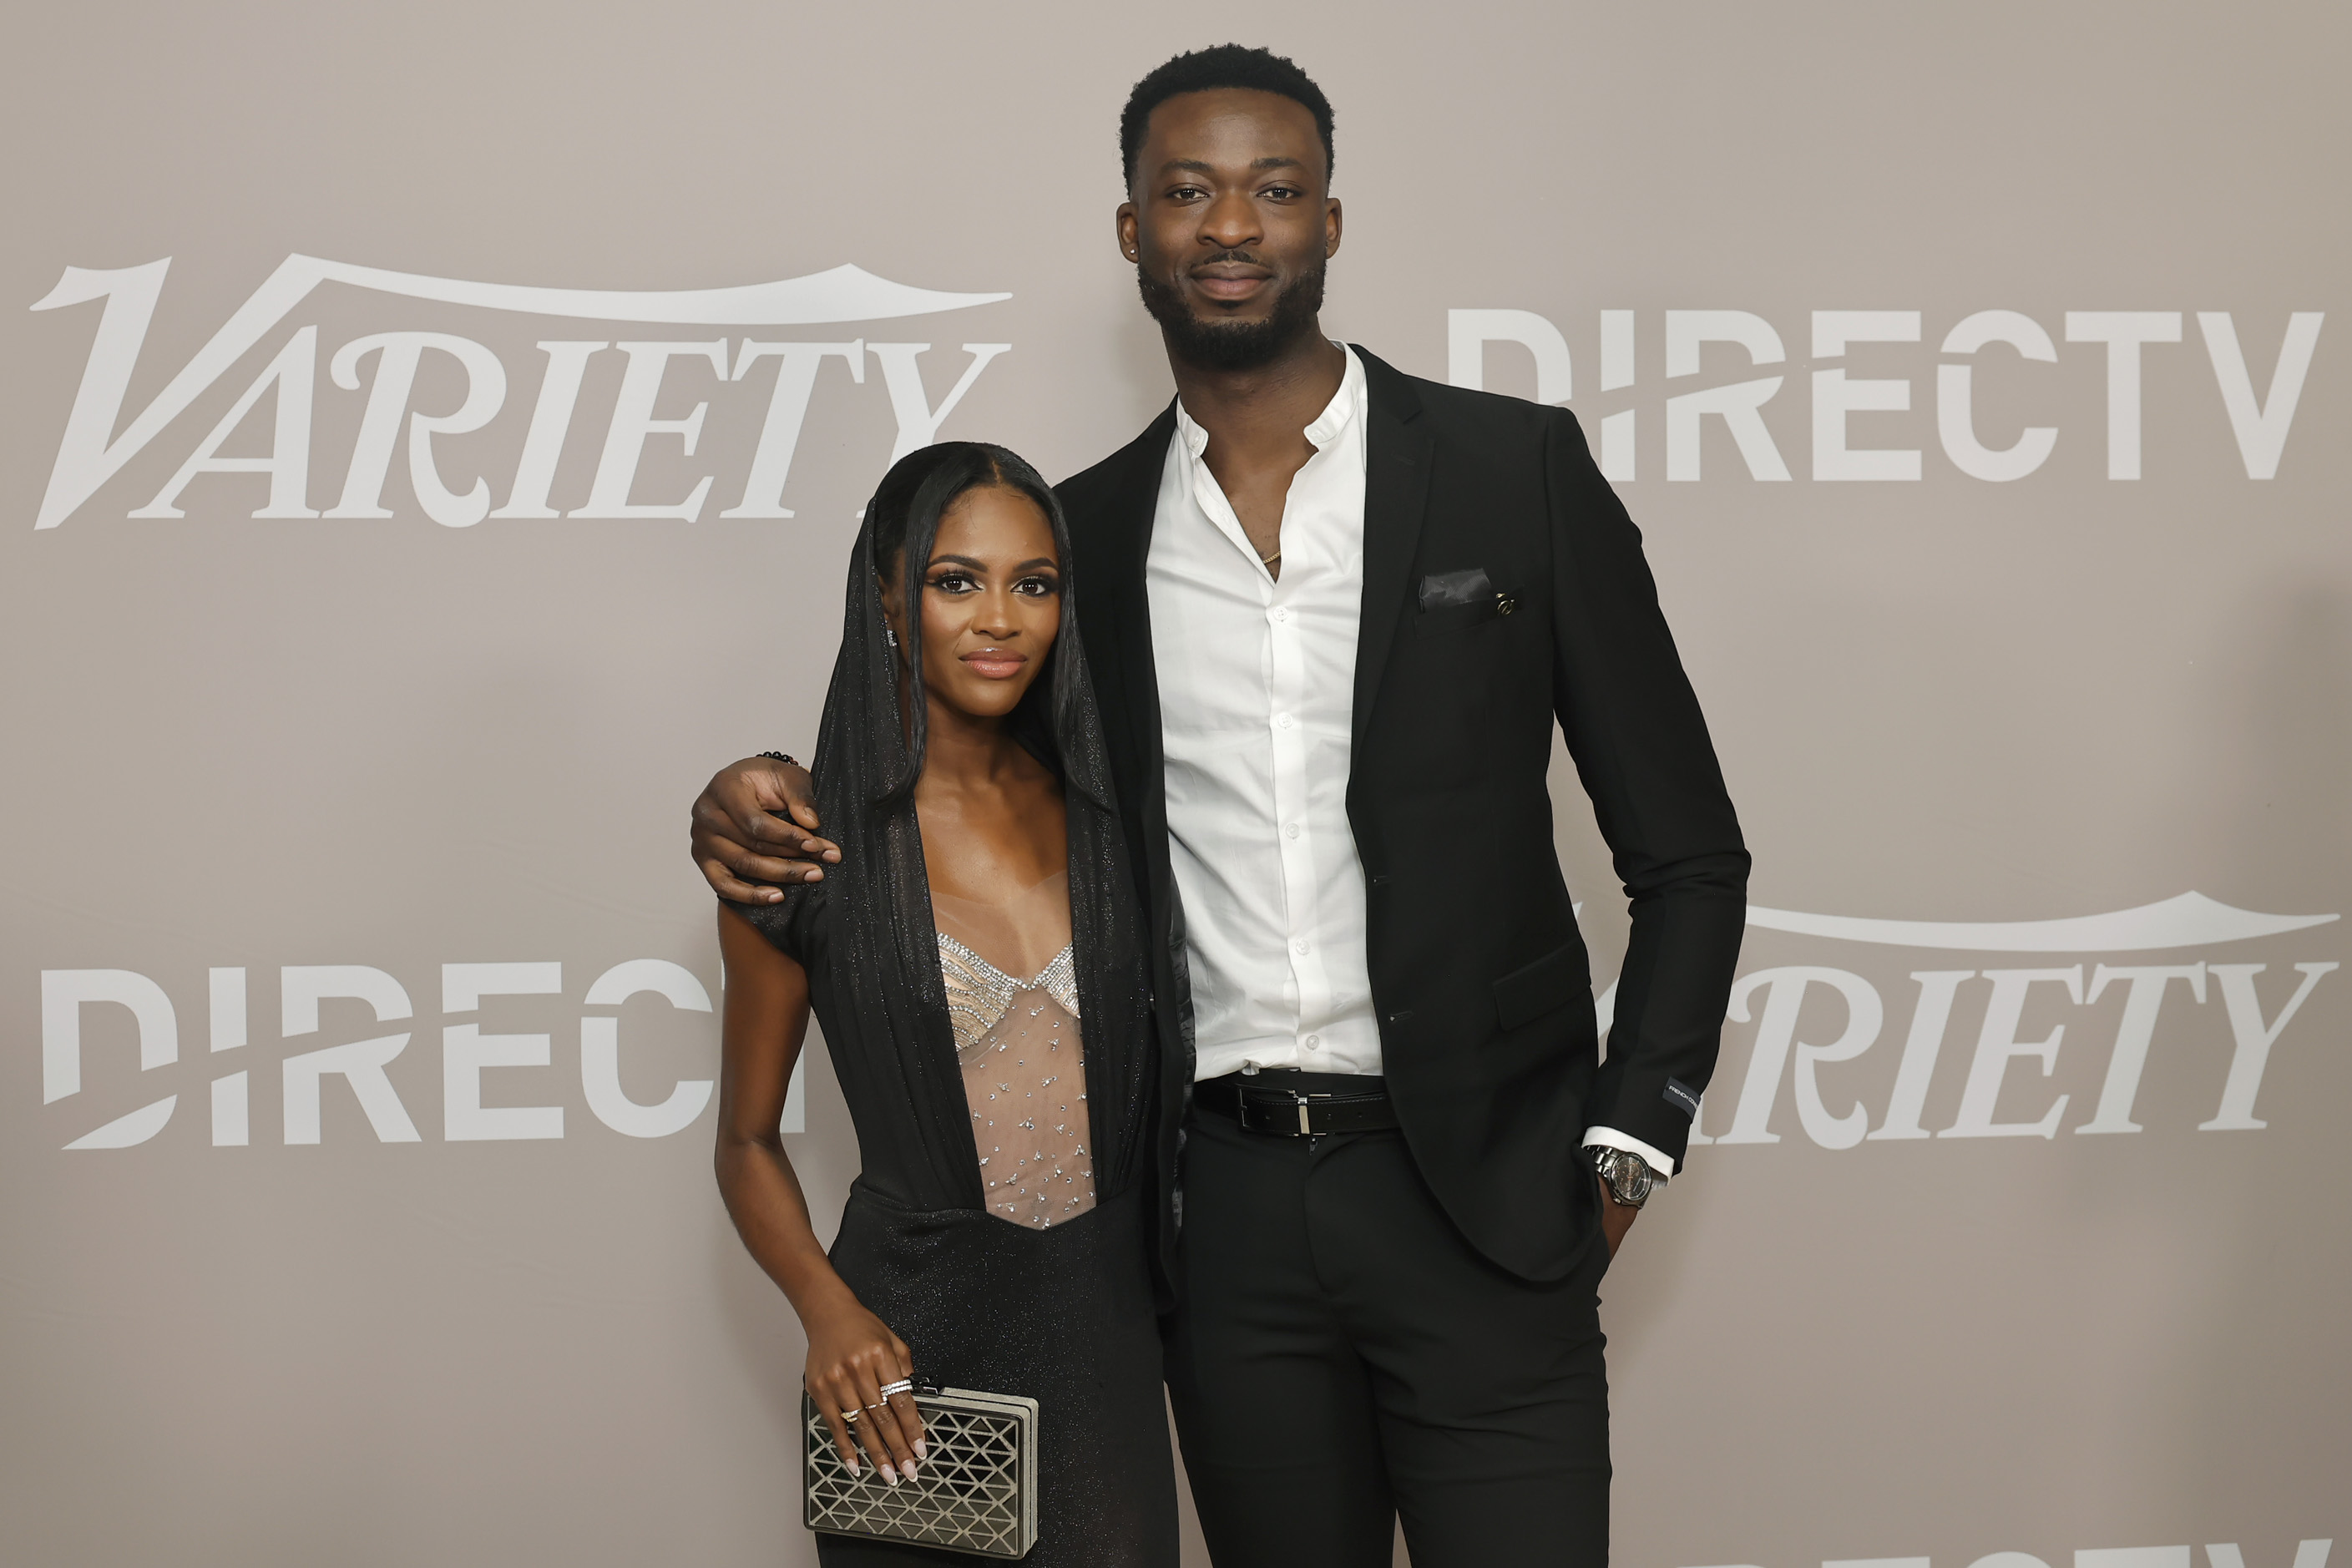 Charity won the Bachelor along with her fiance, Dotun